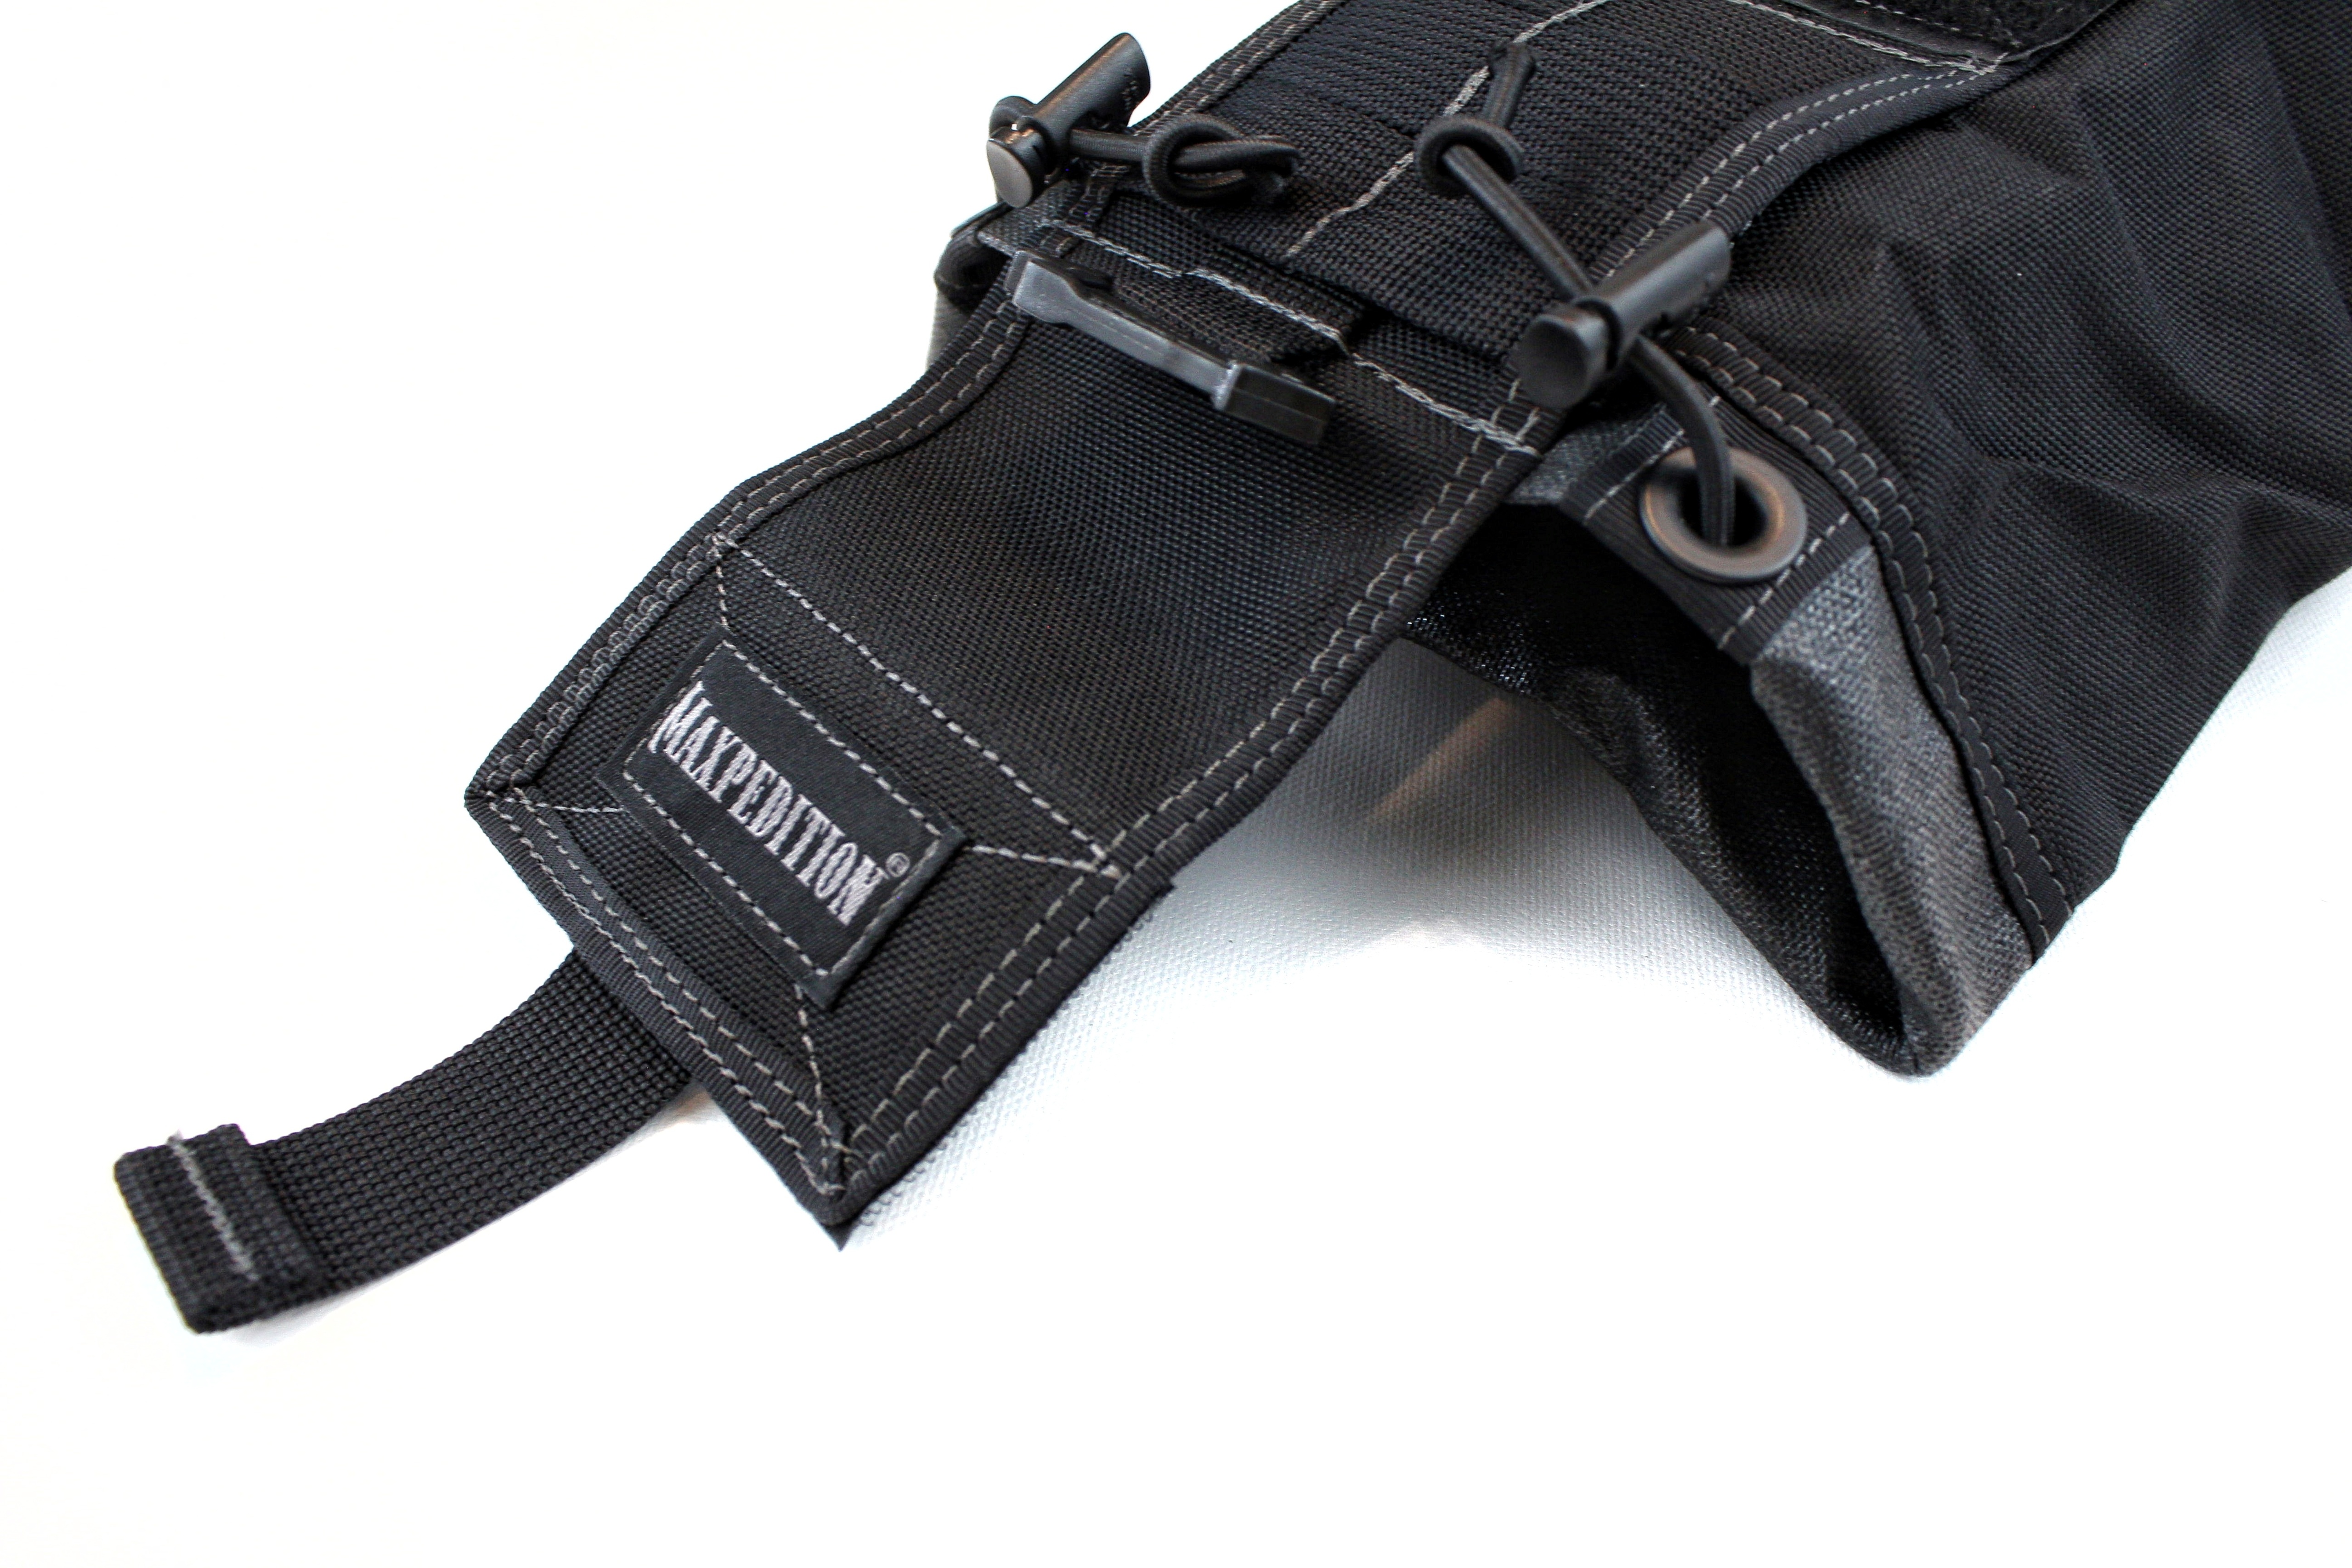 Maxpedition ZFBLTPB Rollypoly Folding Belt Pouch (Black)